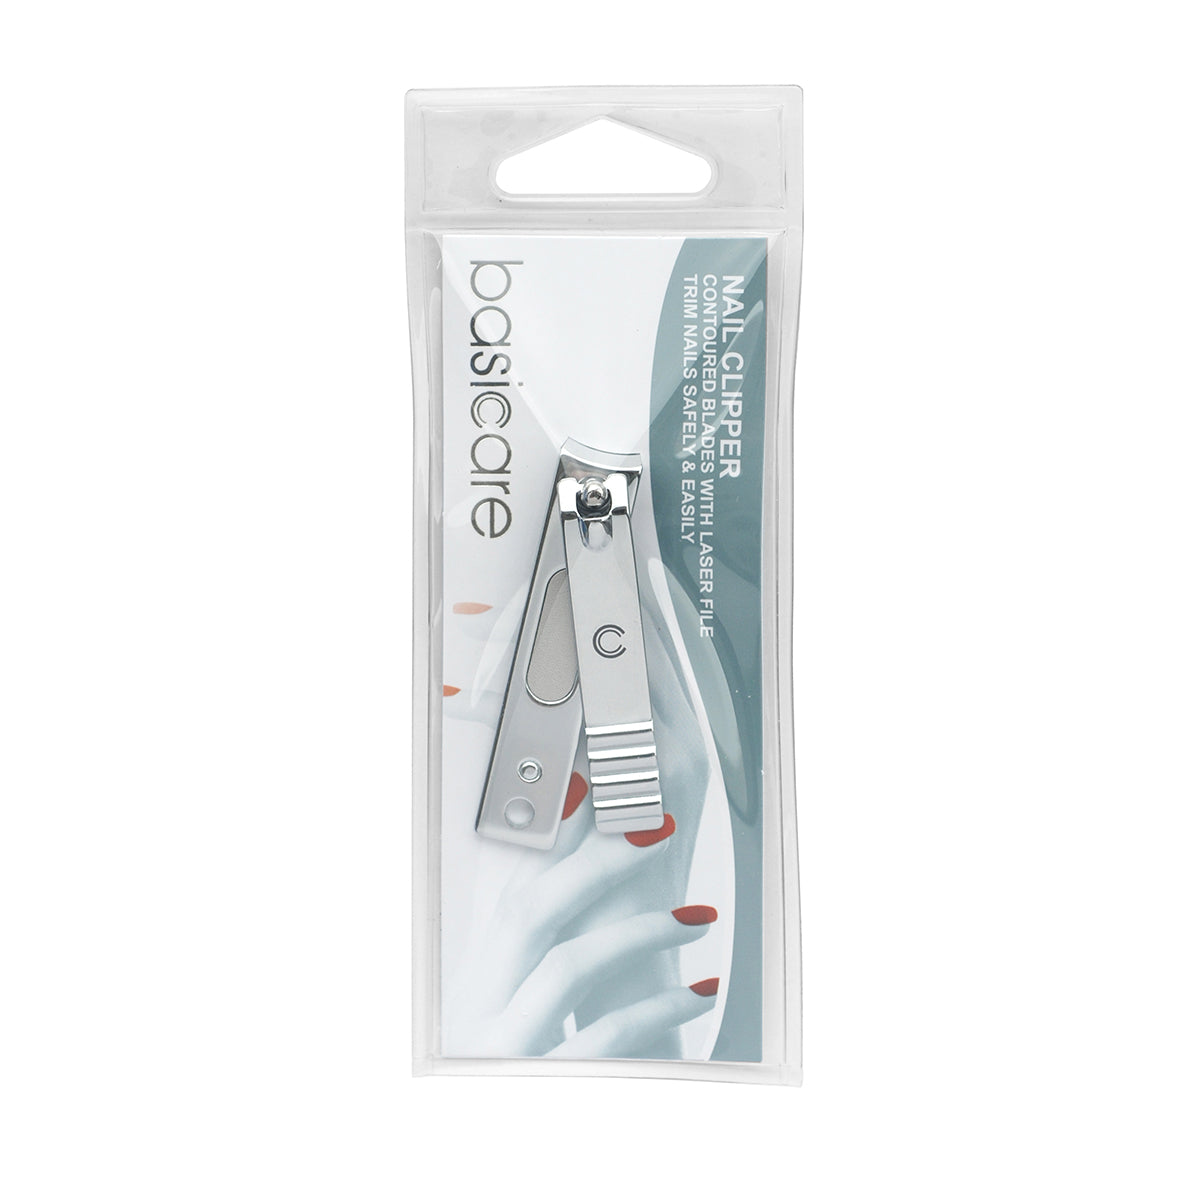 Basicare Stainless Steel Curved Blade Nail Clipper (7616125403360)